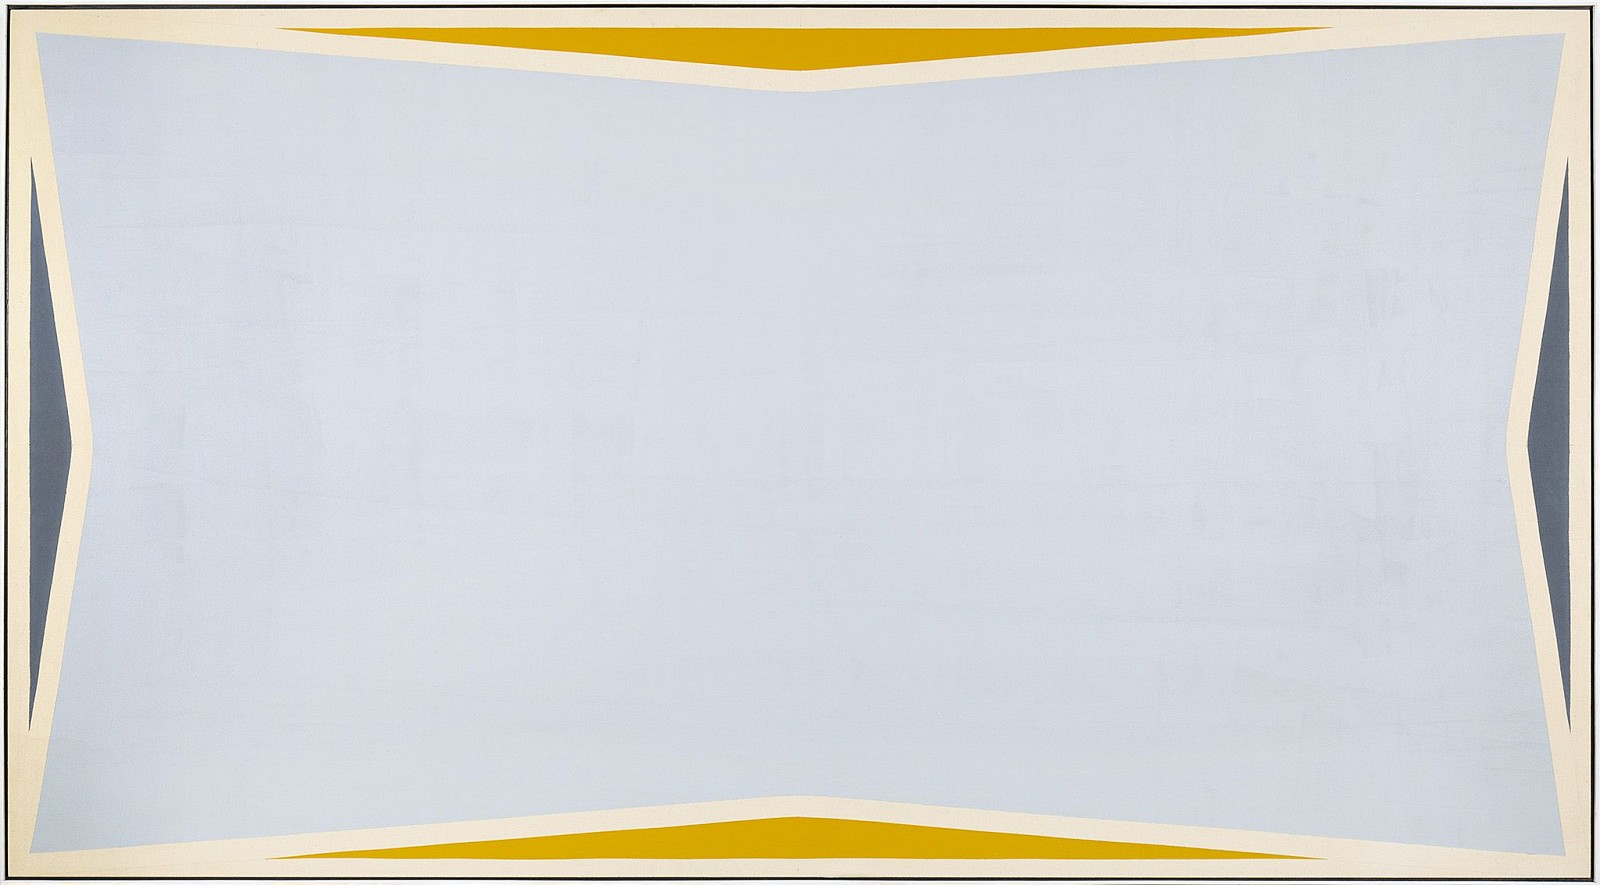 Larry Zox, Palanpup [sic], 1967
Acrylic on canvas, 59 1/2 x 108 in. (151.1 x 274.3 cm)
ZOX-00051